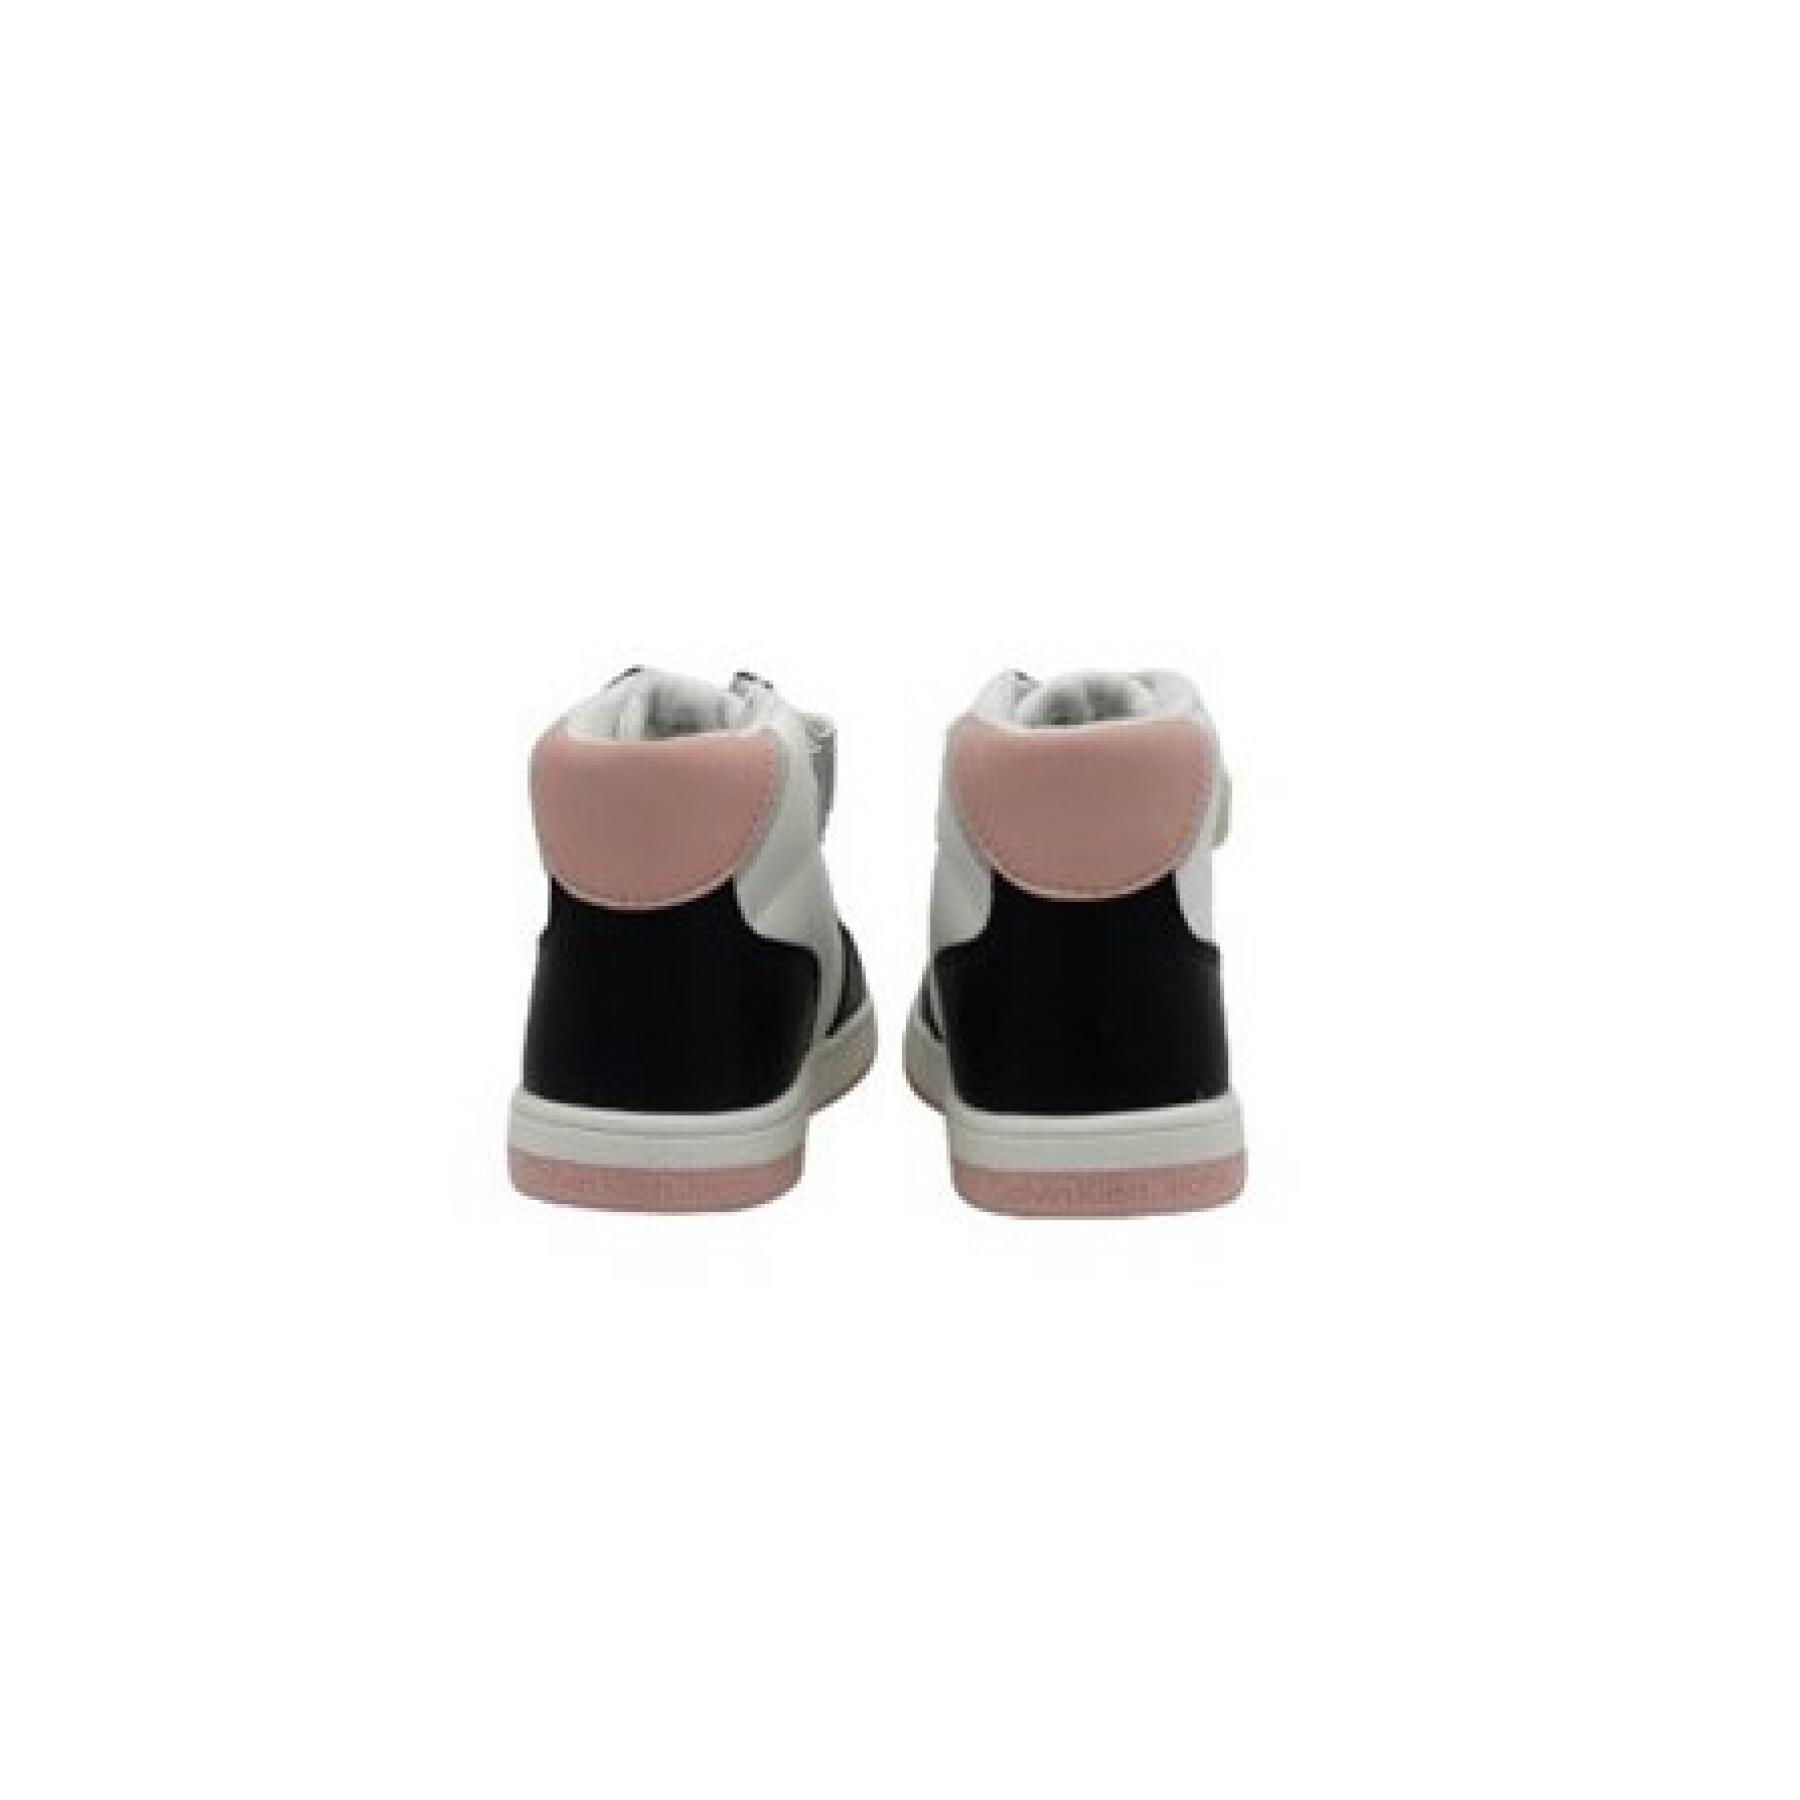 Lace-up/velcro sneakers for kids Calvin Klein black/white/pink